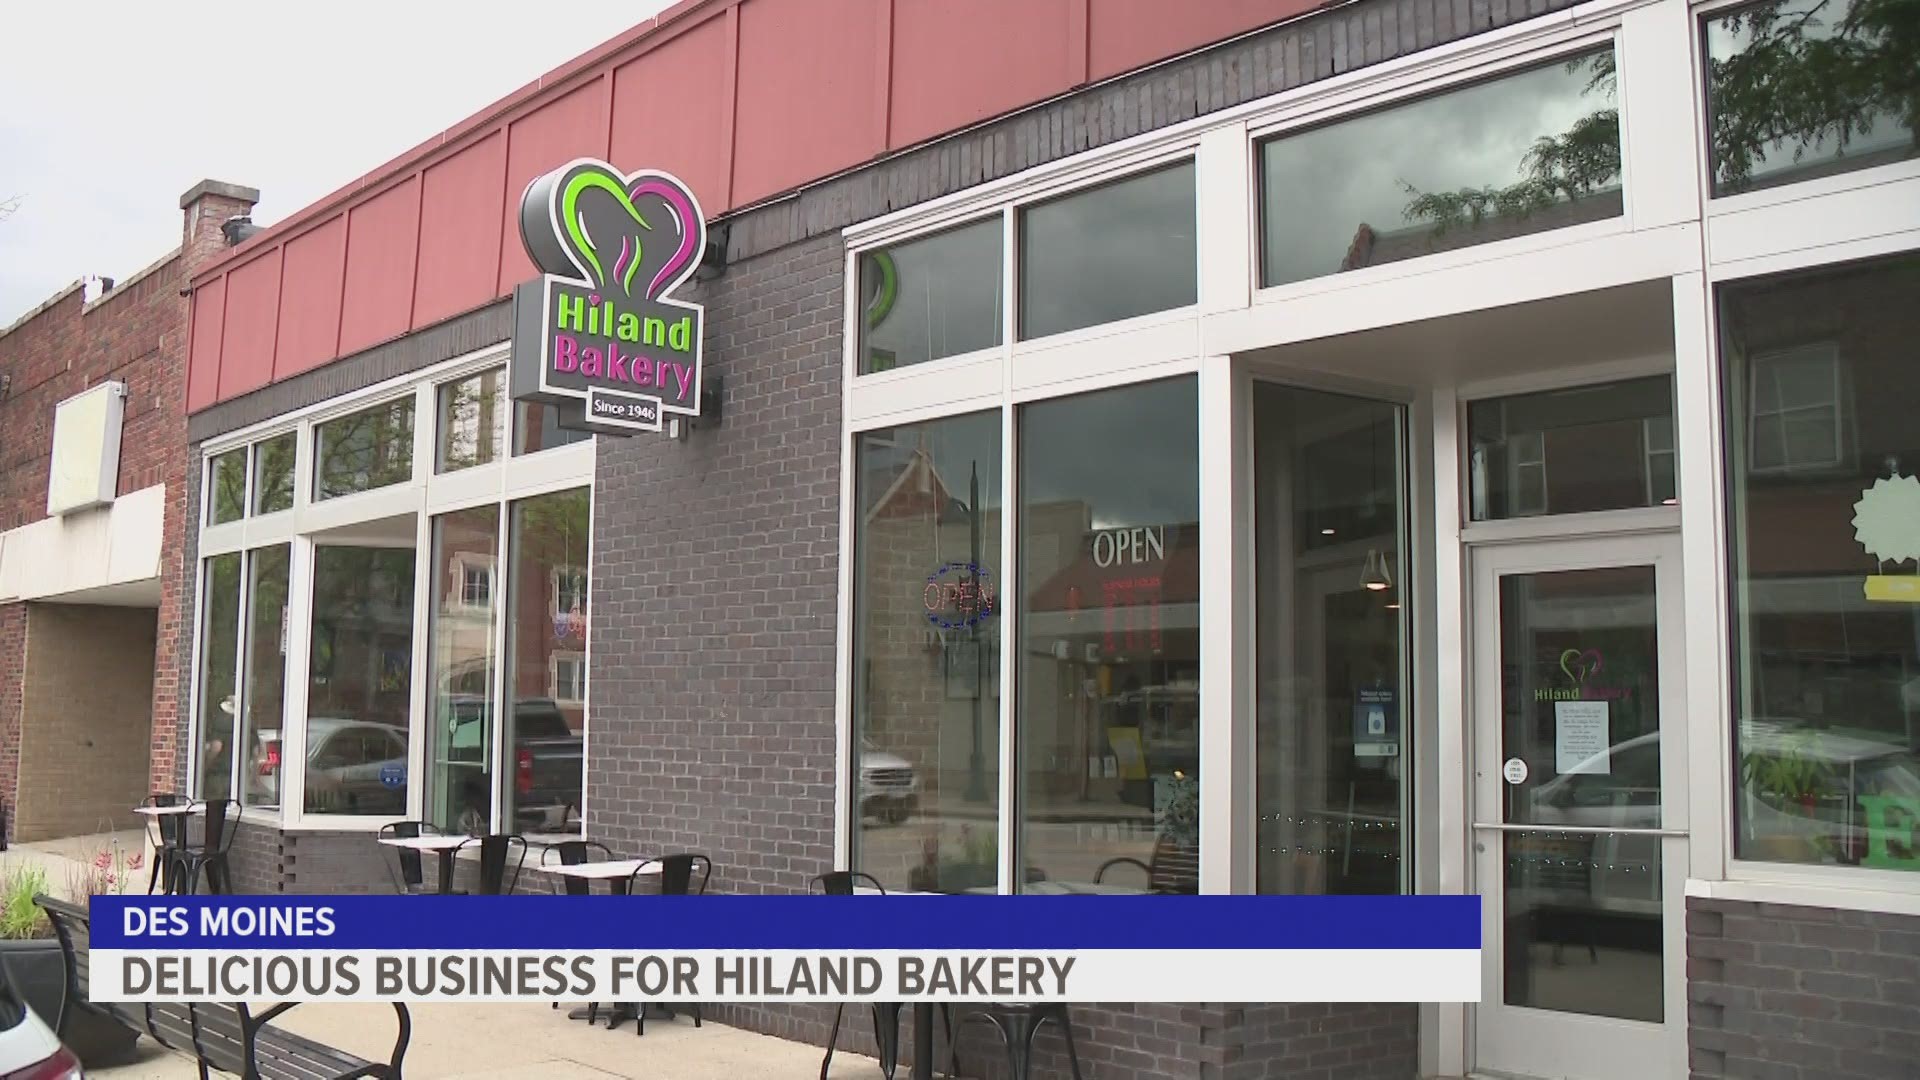 Hiland Bakery said business lately has been sweet as COVID-19 restrictions continue to ease up.